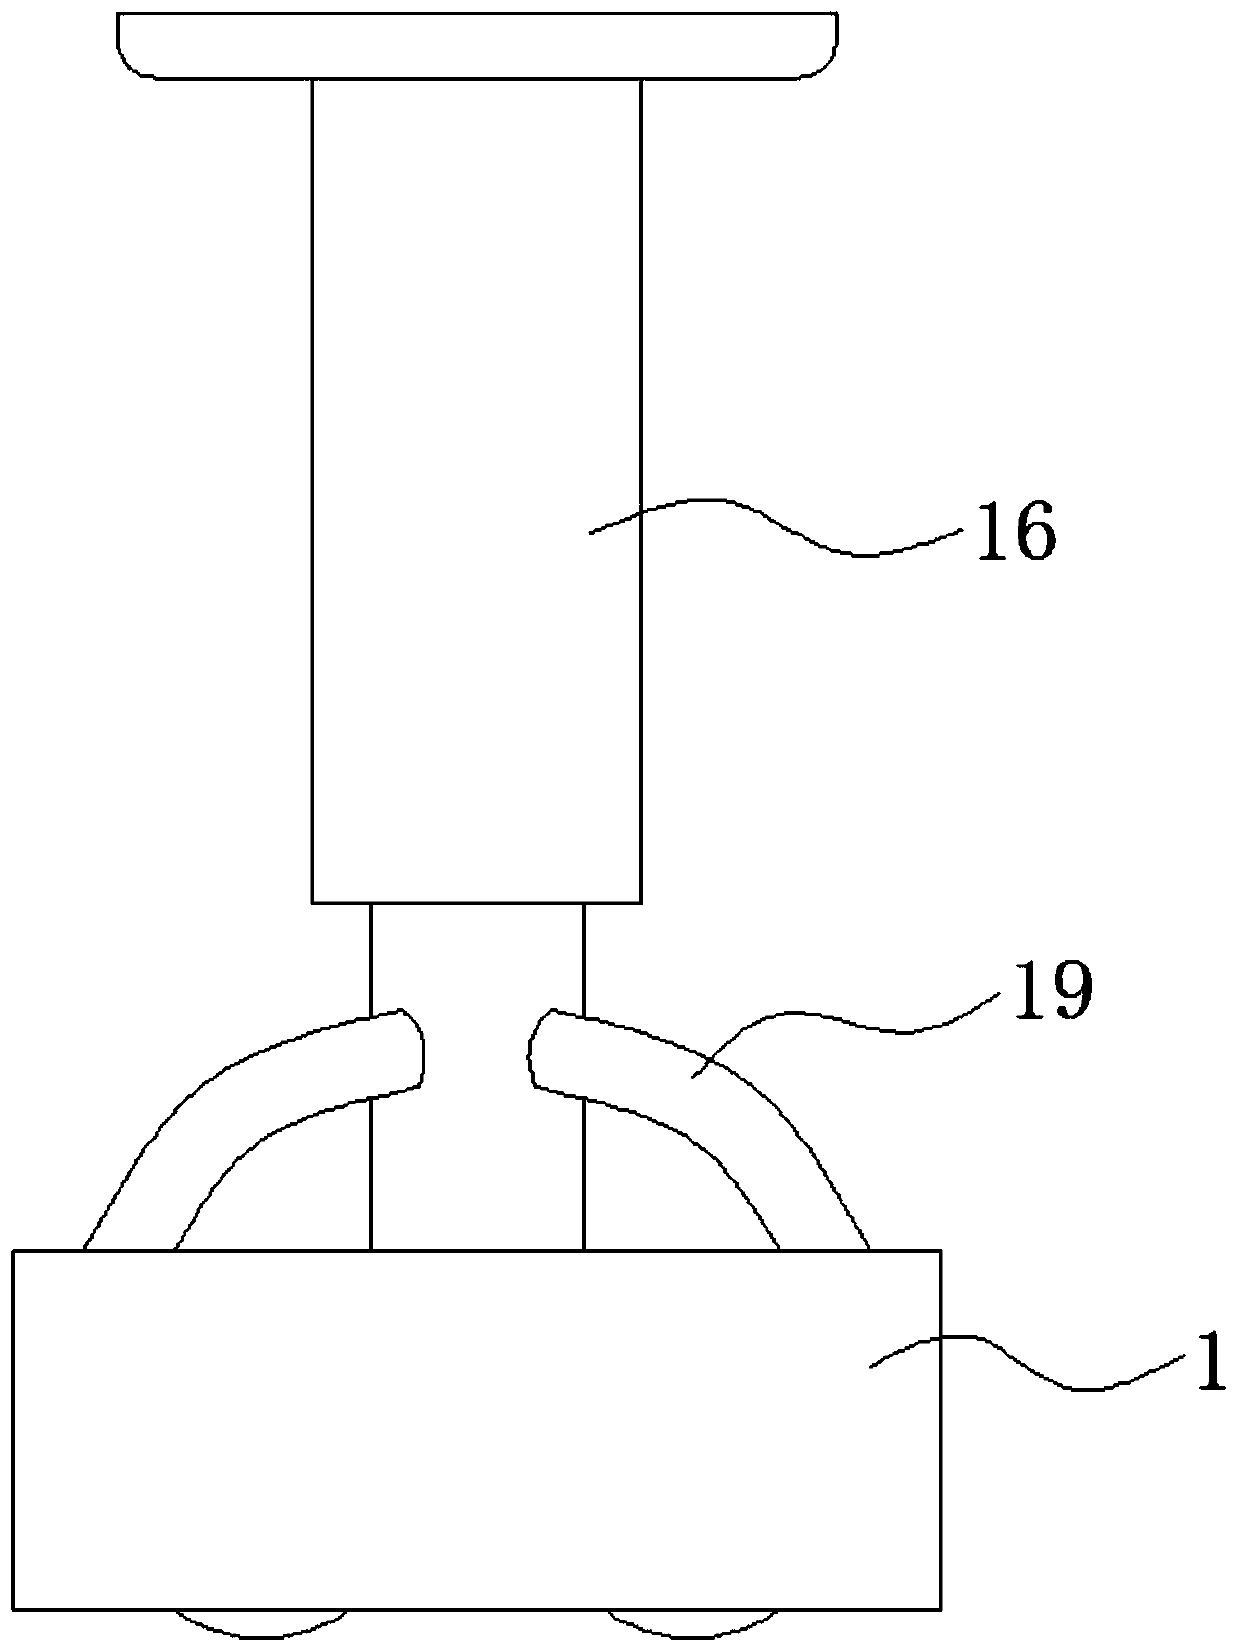 Heating device based on heating conversion for bathroom